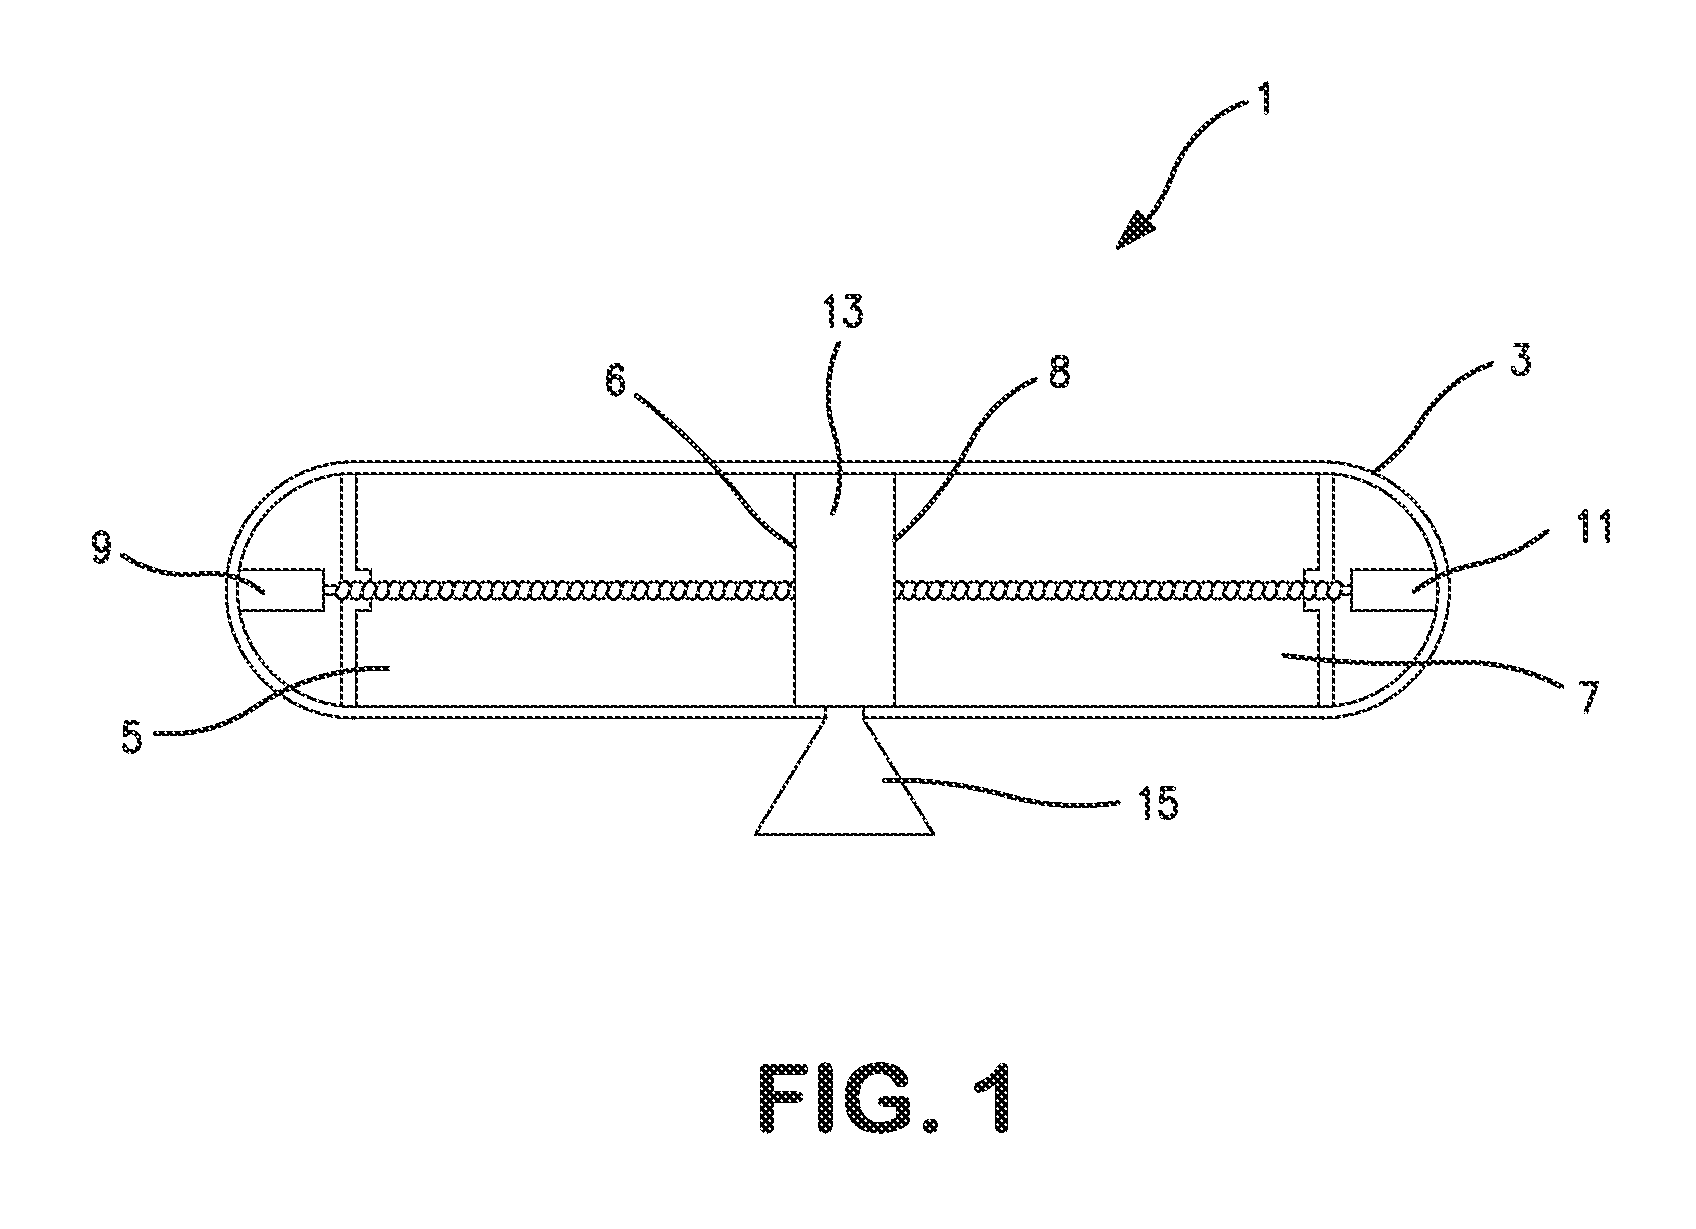 Propulsion system, opposing grains rocket engine, and method for controlling the burn rate of solid propellant grains